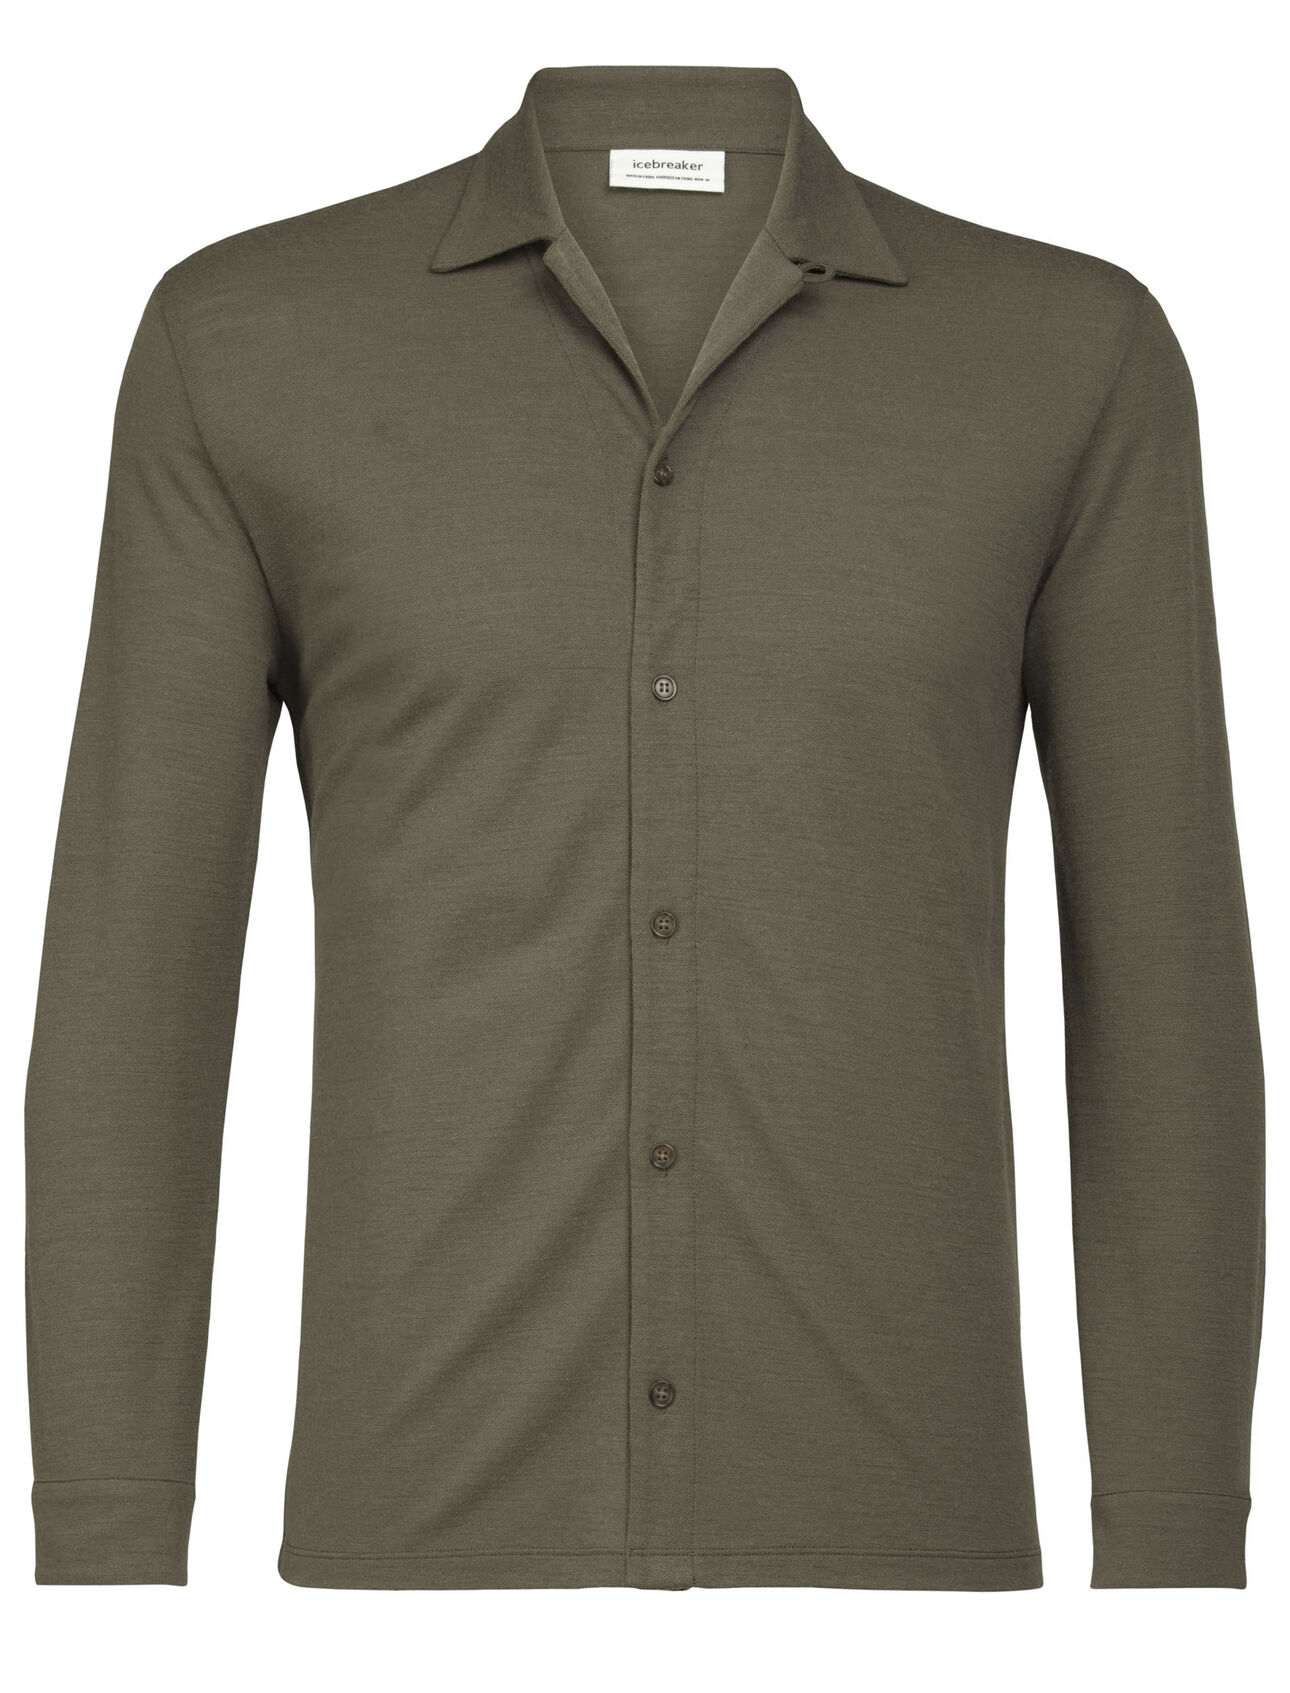 dla mężczyzn Merino Pique Long Sleeve Shirt A lightweight, 100% merino top with a classic button-front silhouette, the Merino Pique Long Sleeve Shirt is reliable, stylish and full of everyday comfort.